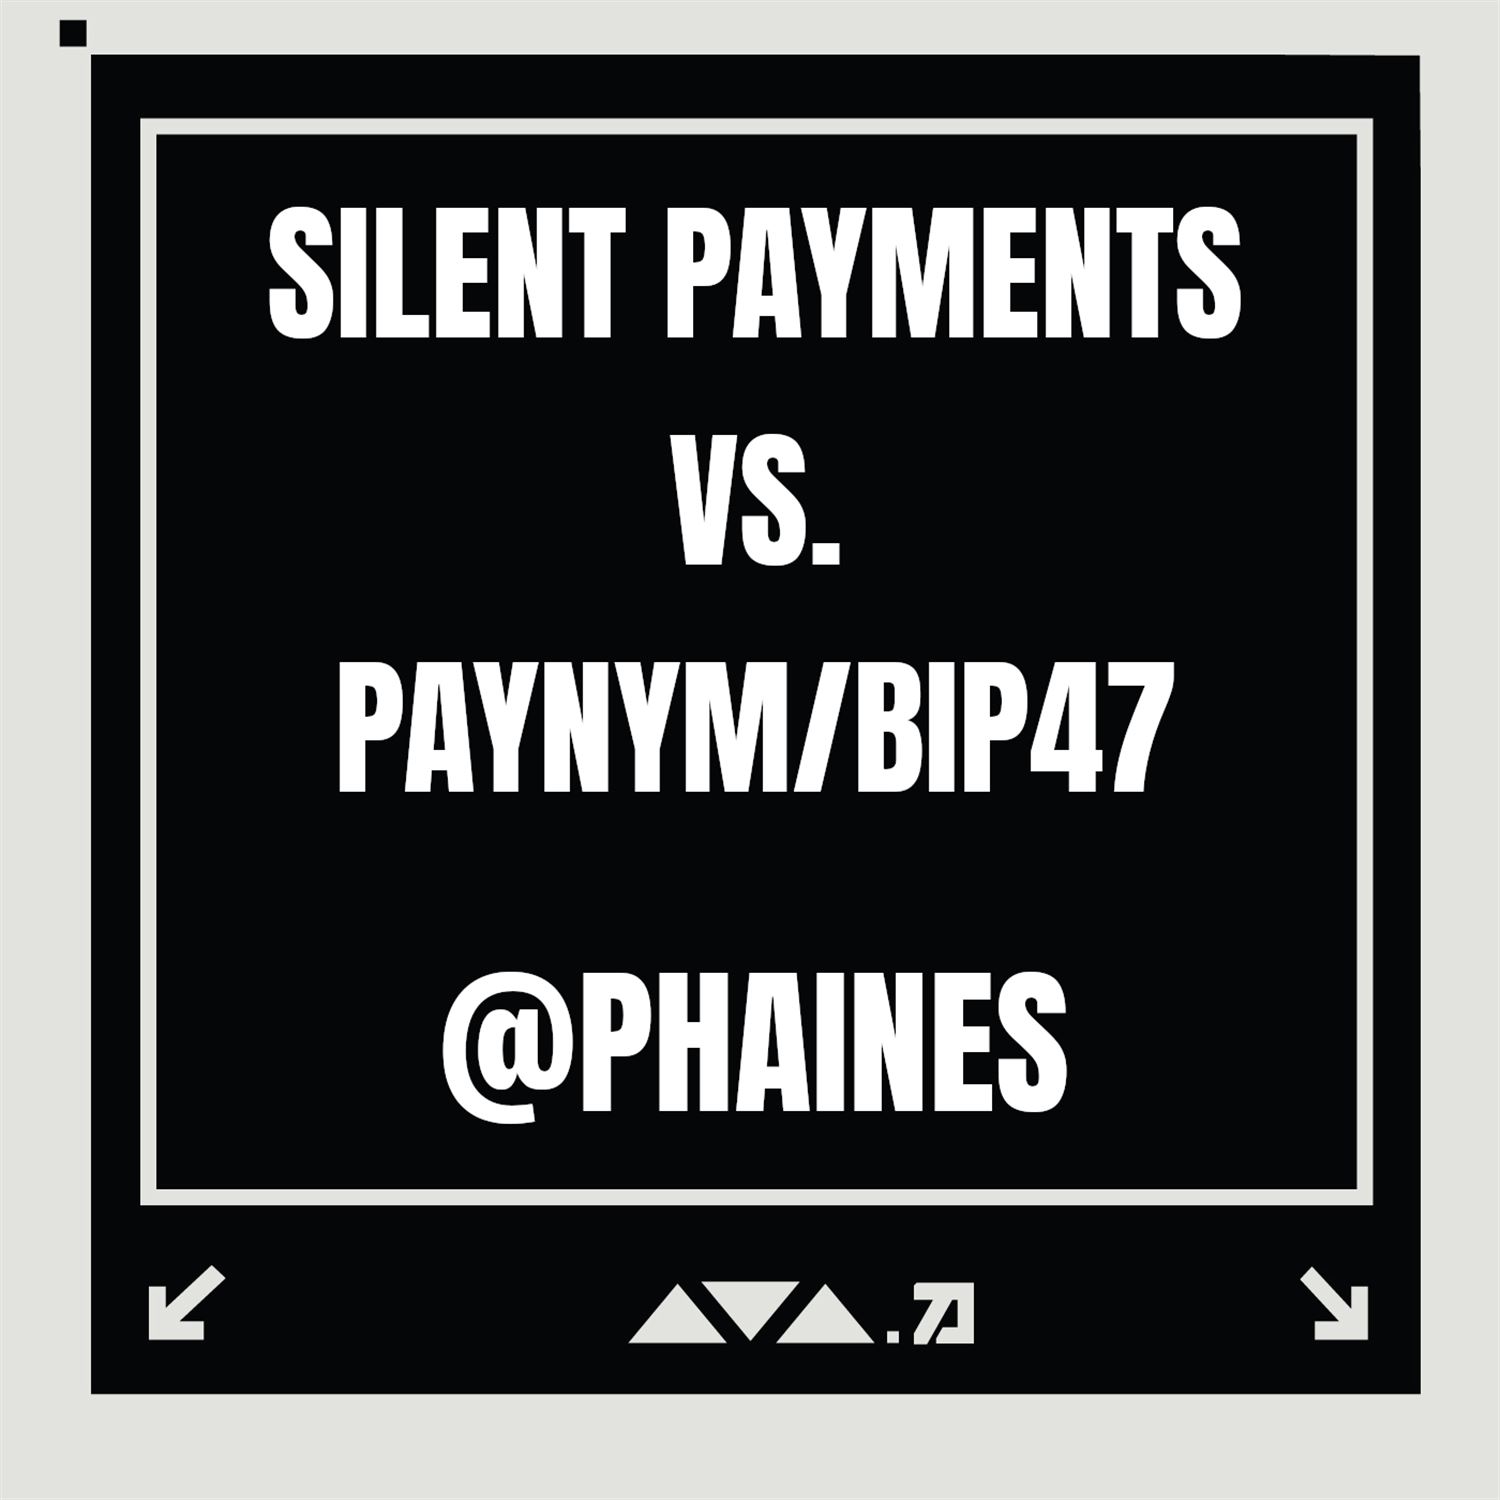 Q8: Silent Payments VS. Paynym